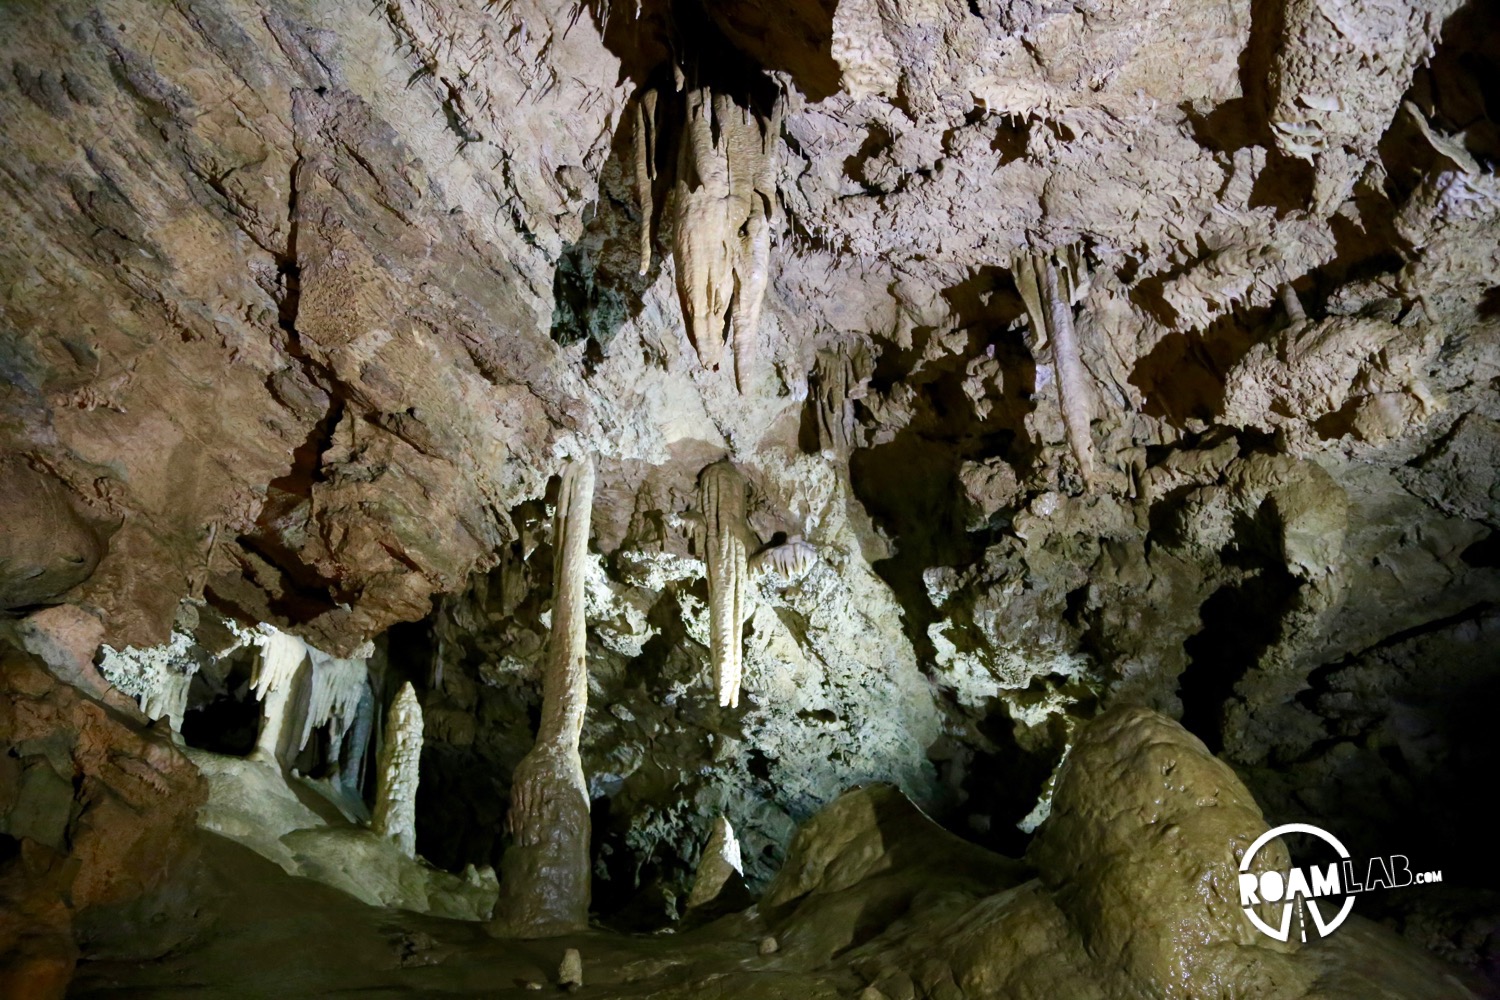 Joaquin Miller's Chapel: a collection of stalagmites, stalactites, and pillars in the Oregon Caves National Monument